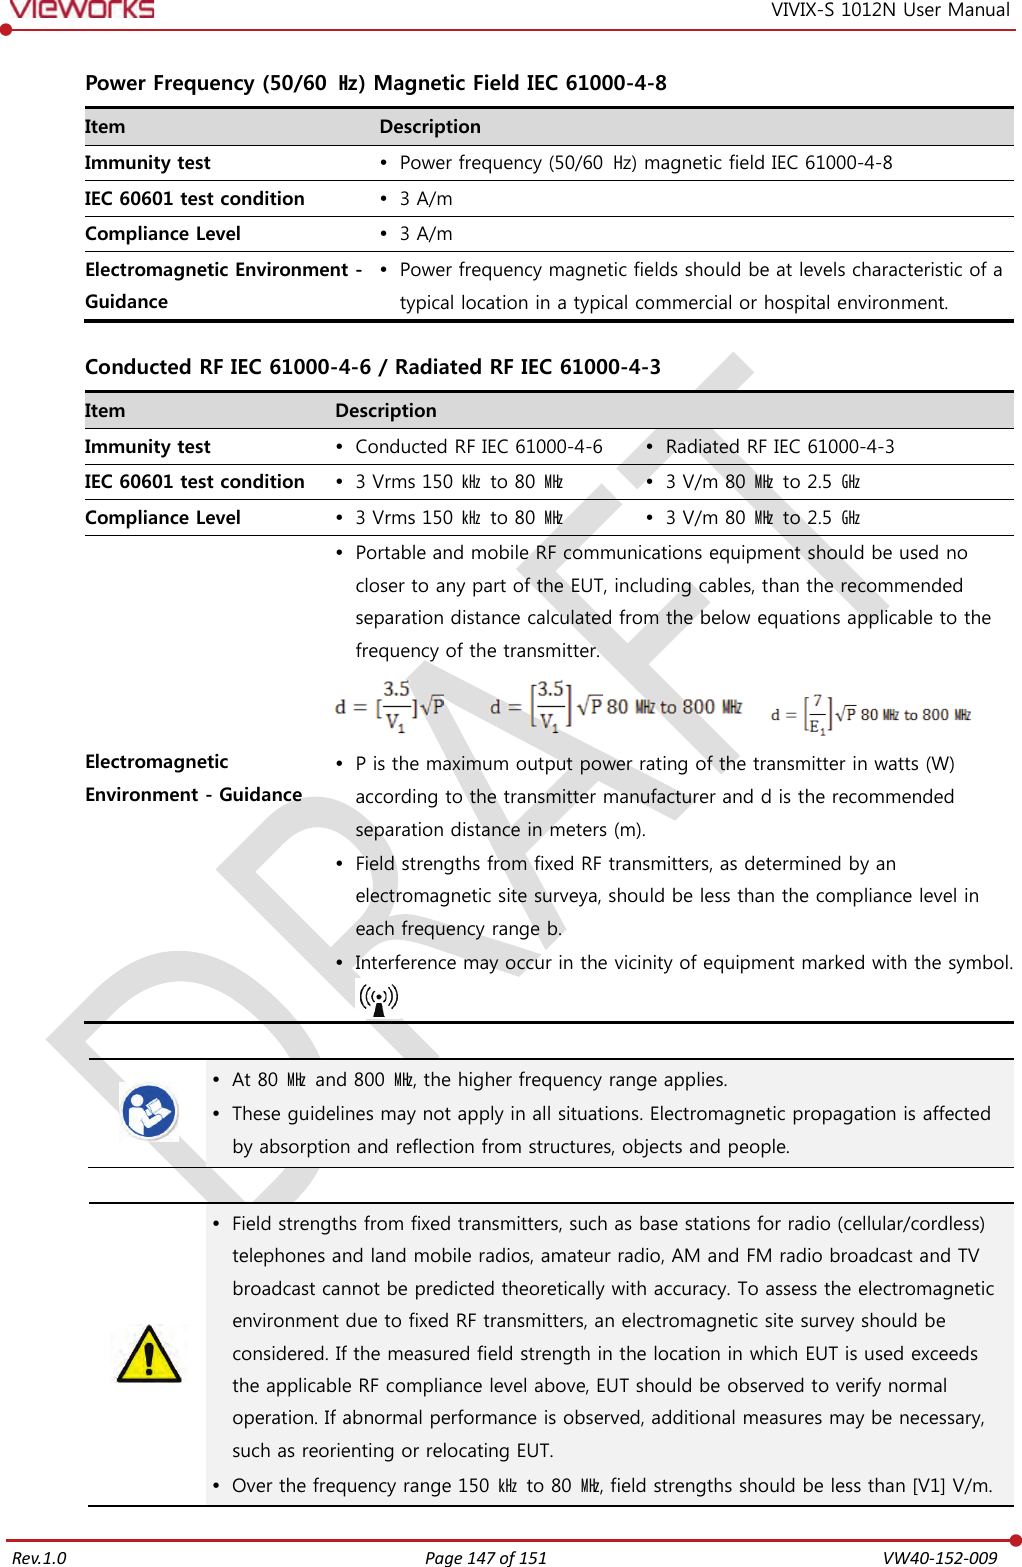   Rev.1.0 Page 147 of 151  VW40-152-009 VIVIX-S 1012N User Manual  Power Frequency (50/60  ㎐) Magnetic Field IEC 61000-4-8 Item Description Immunity test  Power frequency (50/60 ㎐) magnetic field IEC 61000-4-8 IEC 60601 test condition  3 A/m Compliance Level  3 A/m Electromagnetic Environment - Guidance  Power frequency magnetic fields should be at levels characteristic of a typical location in a typical commercial or hospital environment.  Conducted RF IEC 61000-4-6 / Radiated RF IEC 61000-4-3 Item Description Immunity test  Conducted RF IEC 61000-4-6   Radiated RF IEC 61000-4-3 IEC 60601 test condition  3 Vrms 150  ㎑ to 80  ㎒   3 V/m 80  ㎒ to 2.5 ㎓ Compliance Level  3 Vrms 150  ㎑ to 80  ㎒     3 V/m 80  ㎒ to 2.5 ㎓ Electromagnetic Environment - Guidance  Portable and mobile RF communications equipment should be used no closer to any part of the EUT, including cables, than the recommended separation distance calculated from the below equations applicable to the frequency of the transmitter.             P is the maximum output power rating of the transmitter in watts (W) according to the transmitter manufacturer and d is the recommended separation distance in meters (m).  Field strengths from fixed RF transmitters, as determined by an electromagnetic site surveya, should be less than the compliance level in each frequency range b.  Interference may occur in the vicinity of equipment marked with the symbol.     At 80 ㎒ and 800 ㎒, the higher frequency range applies.  These guidelines may not apply in all situations. Electromagnetic propagation is affected by absorption and reflection from structures, objects and people.    Field strengths from fixed transmitters, such as base stations for radio (cellular/cordless) telephones and land mobile radios, amateur radio, AM and FM radio broadcast and TV broadcast cannot be predicted theoretically with accuracy. To assess the electromagnetic environment due to fixed RF transmitters, an electromagnetic site survey should be considered. If the measured field strength in the location in which EUT is used exceeds the applicable RF compliance level above, EUT should be observed to verify normal operation. If abnormal performance is observed, additional measures may be necessary, such as reorienting or relocating EUT.  Over the frequency range 150 ㎑ to 80 ㎒, field strengths should be less than [V1] V/m. 